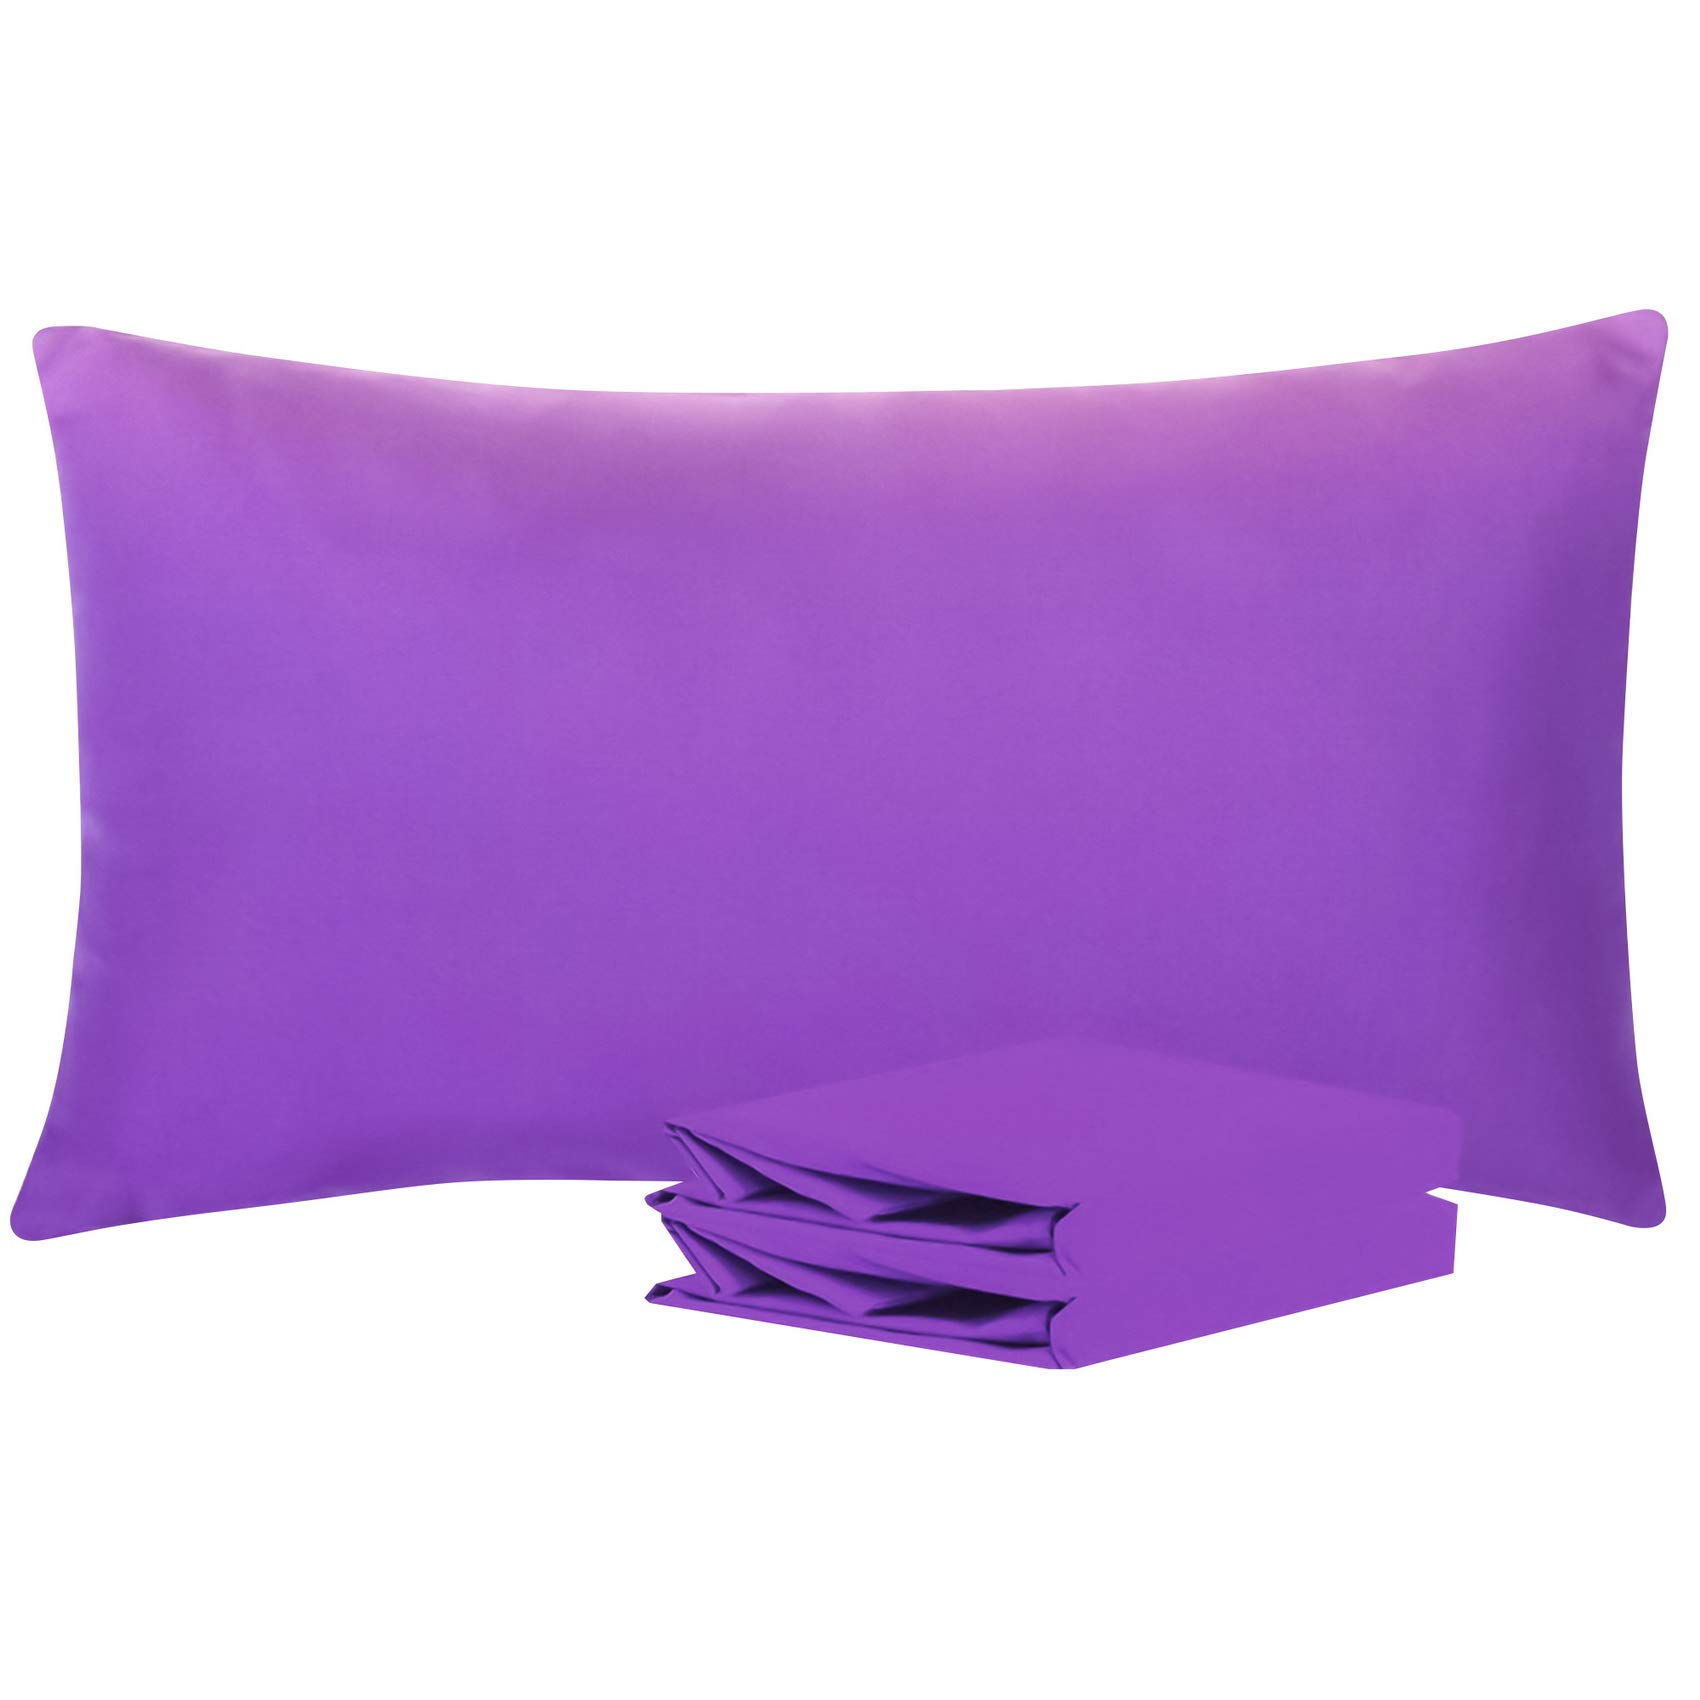 Book Cover NTBAY 100% Brushed Microfiber King Pillowcases Set of 2, Super Soft and Cozy, Wrinkle, Fade, Stain Resistant with Envelope Closure Pillow Cases, 20x36 Inches, Purple Purple King (20